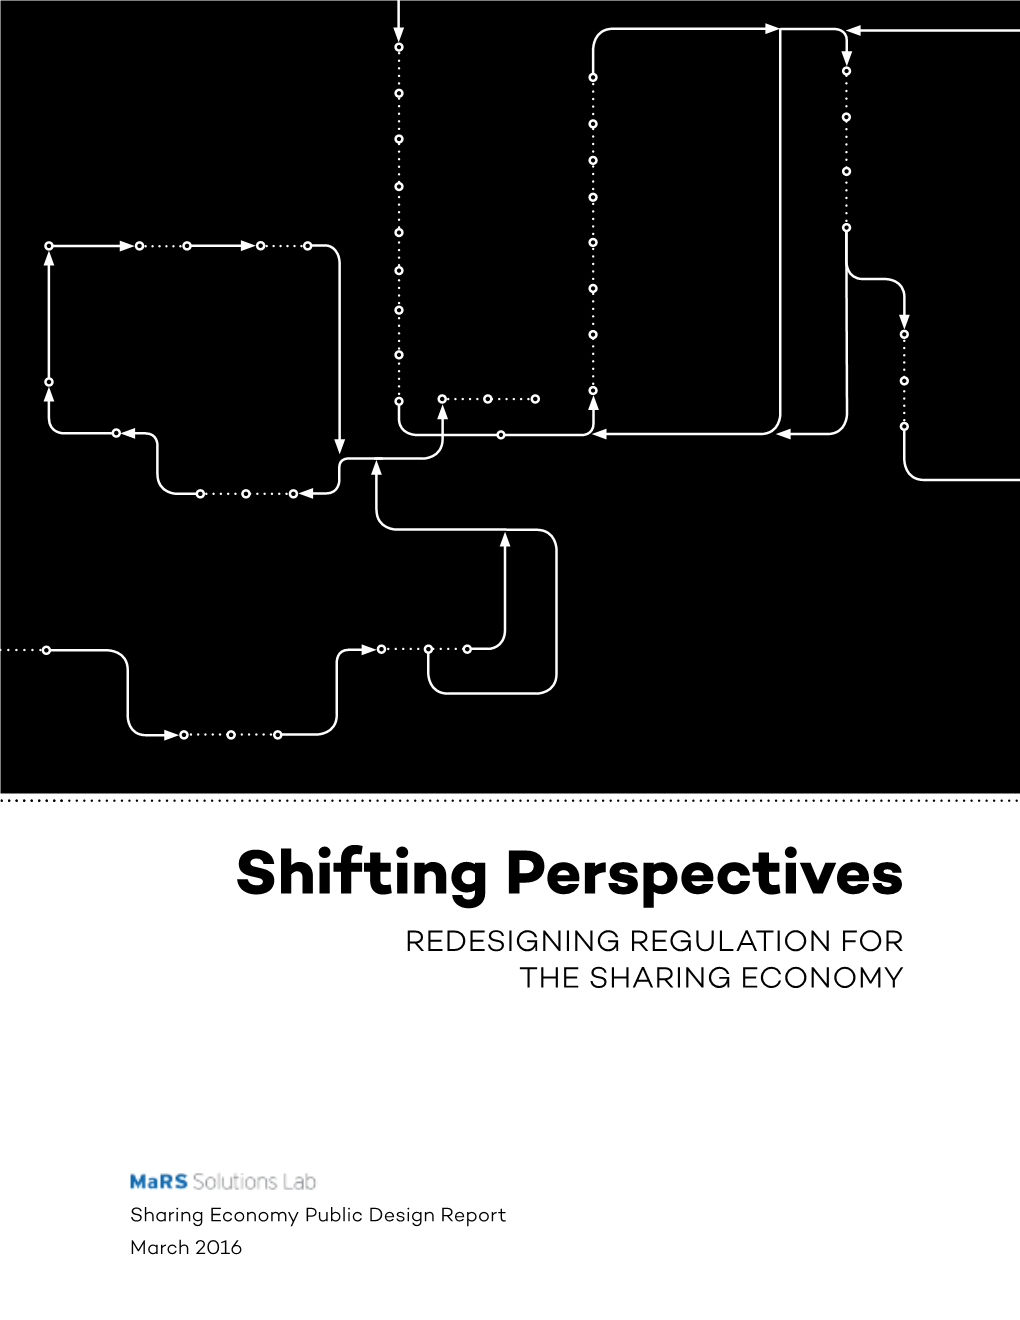 Shifting Perspectives REDESIGNING REGULATION for the SHARING ECONOMY